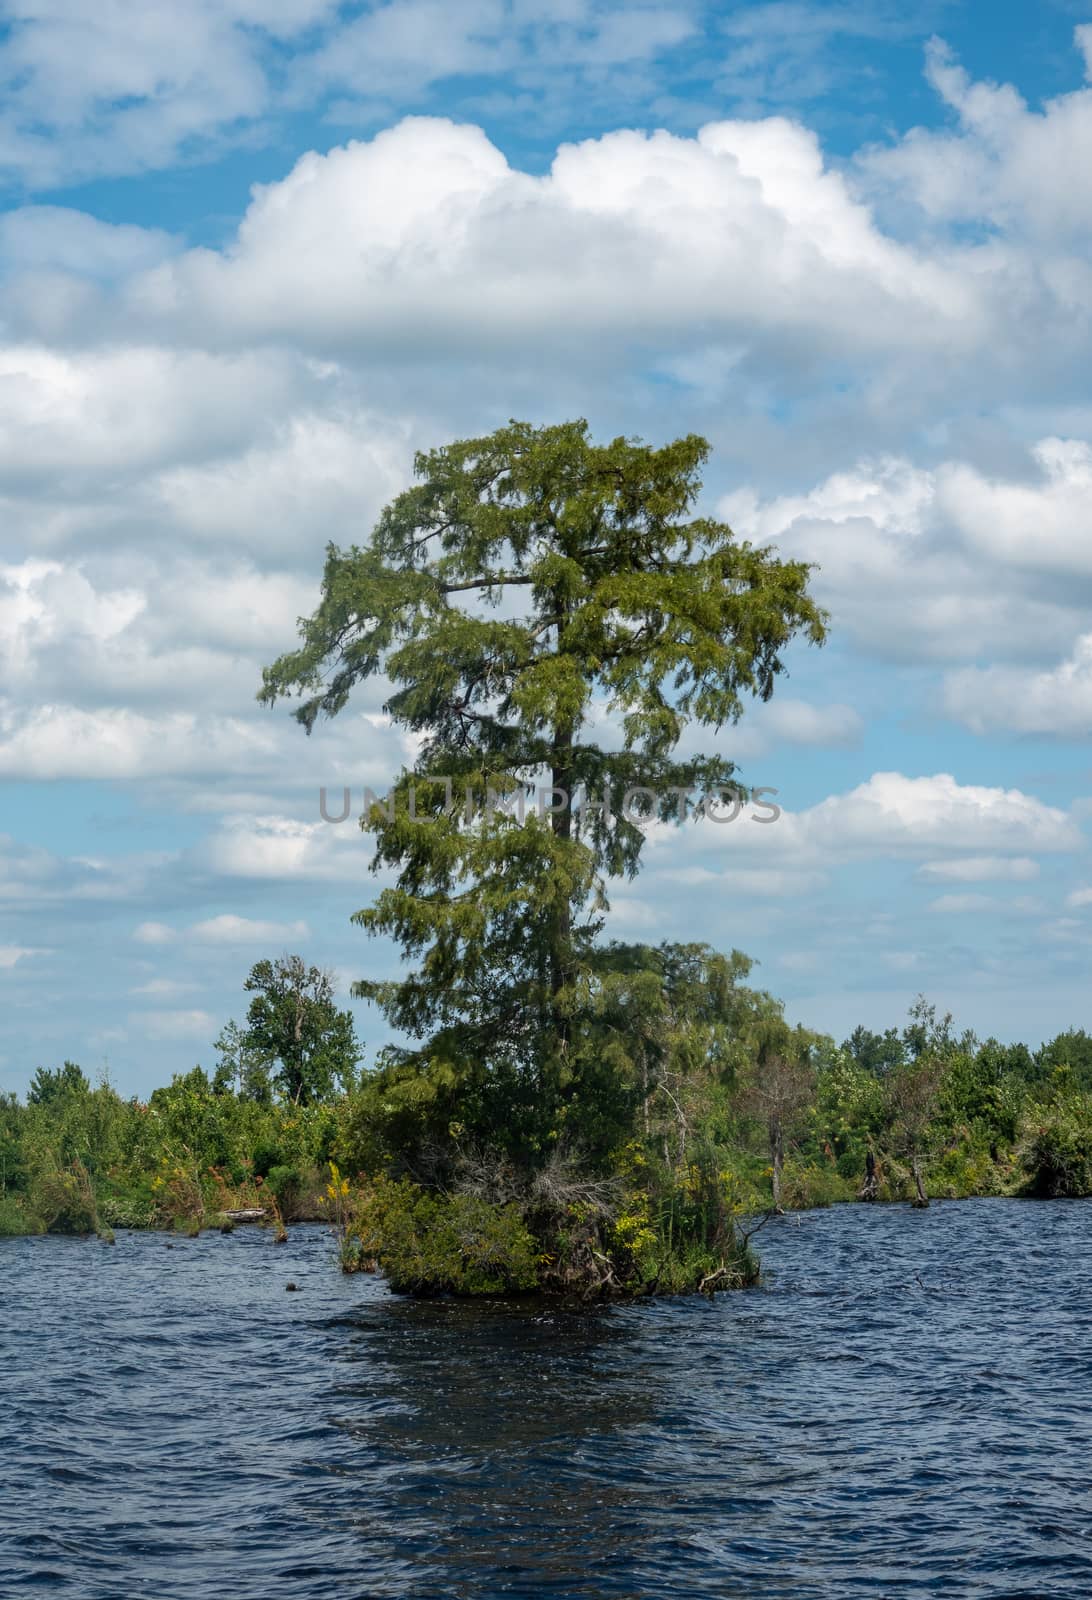 Trees standing alone in the Great Dismal Swamp in Virginia, USA by steheap